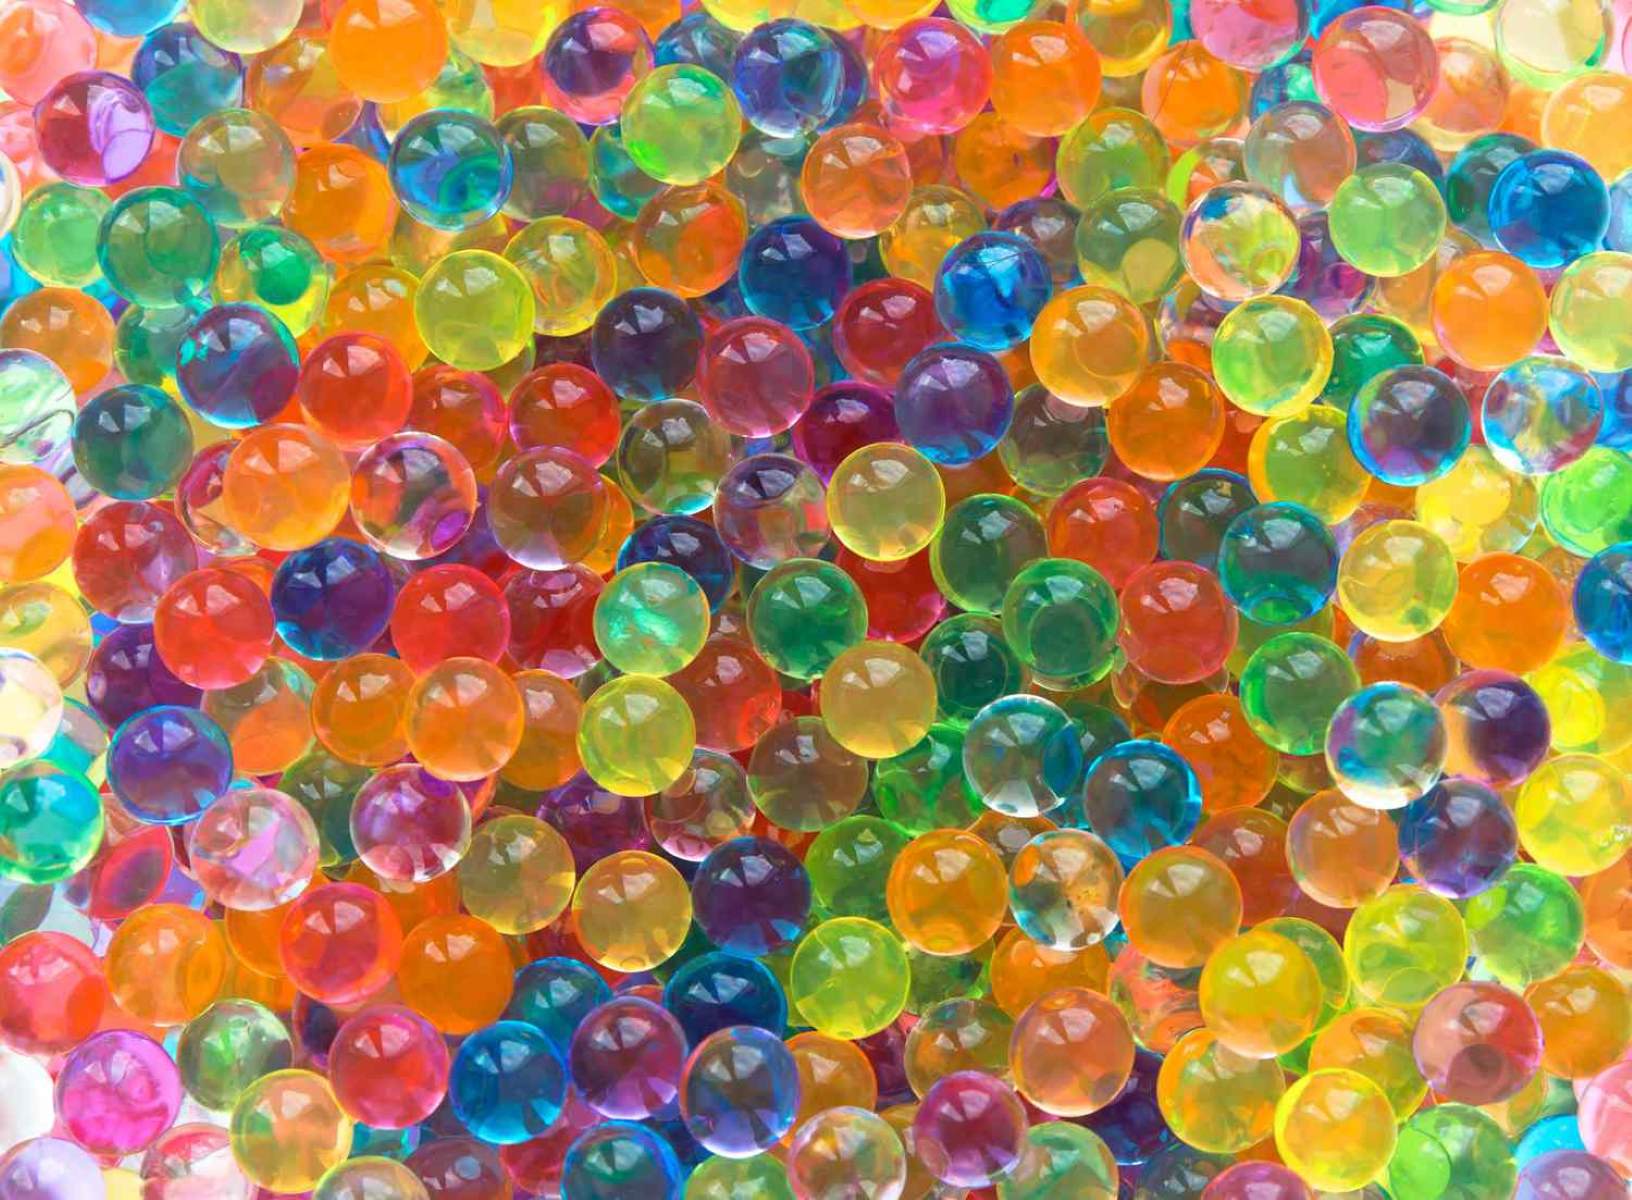 The Ultimate Guide To Growing Orbeez